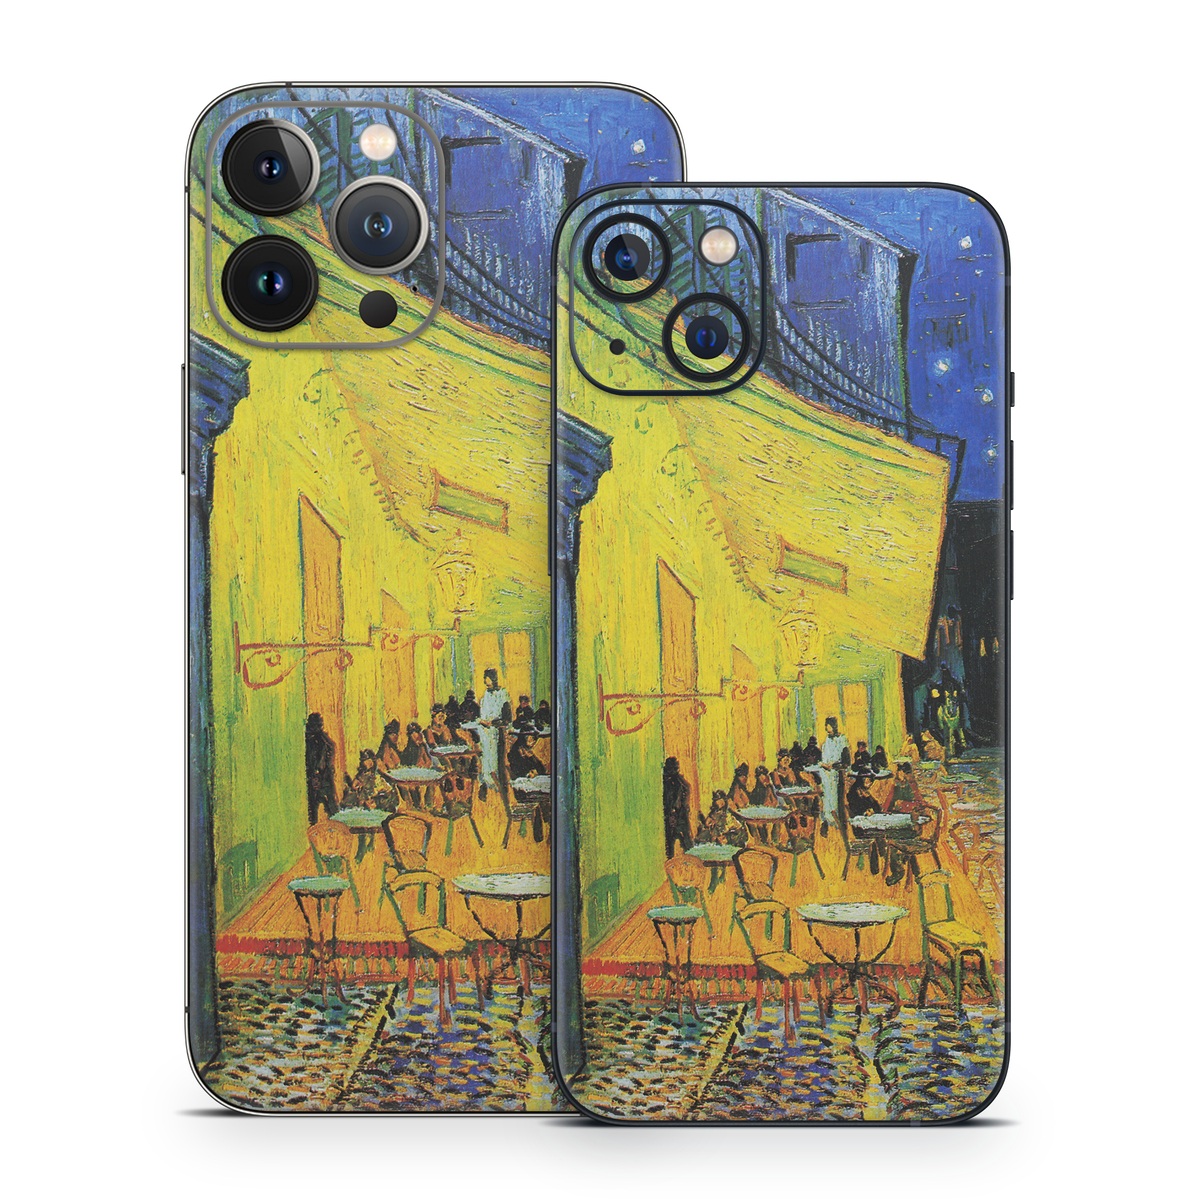 iPhone 13 Series Skin design of Painting, Art, Yellow, Watercolor paint, Illustration, Modern art, Visual arts, Street, Infrastructure, Tree, with green, black, blue, gray, red colors